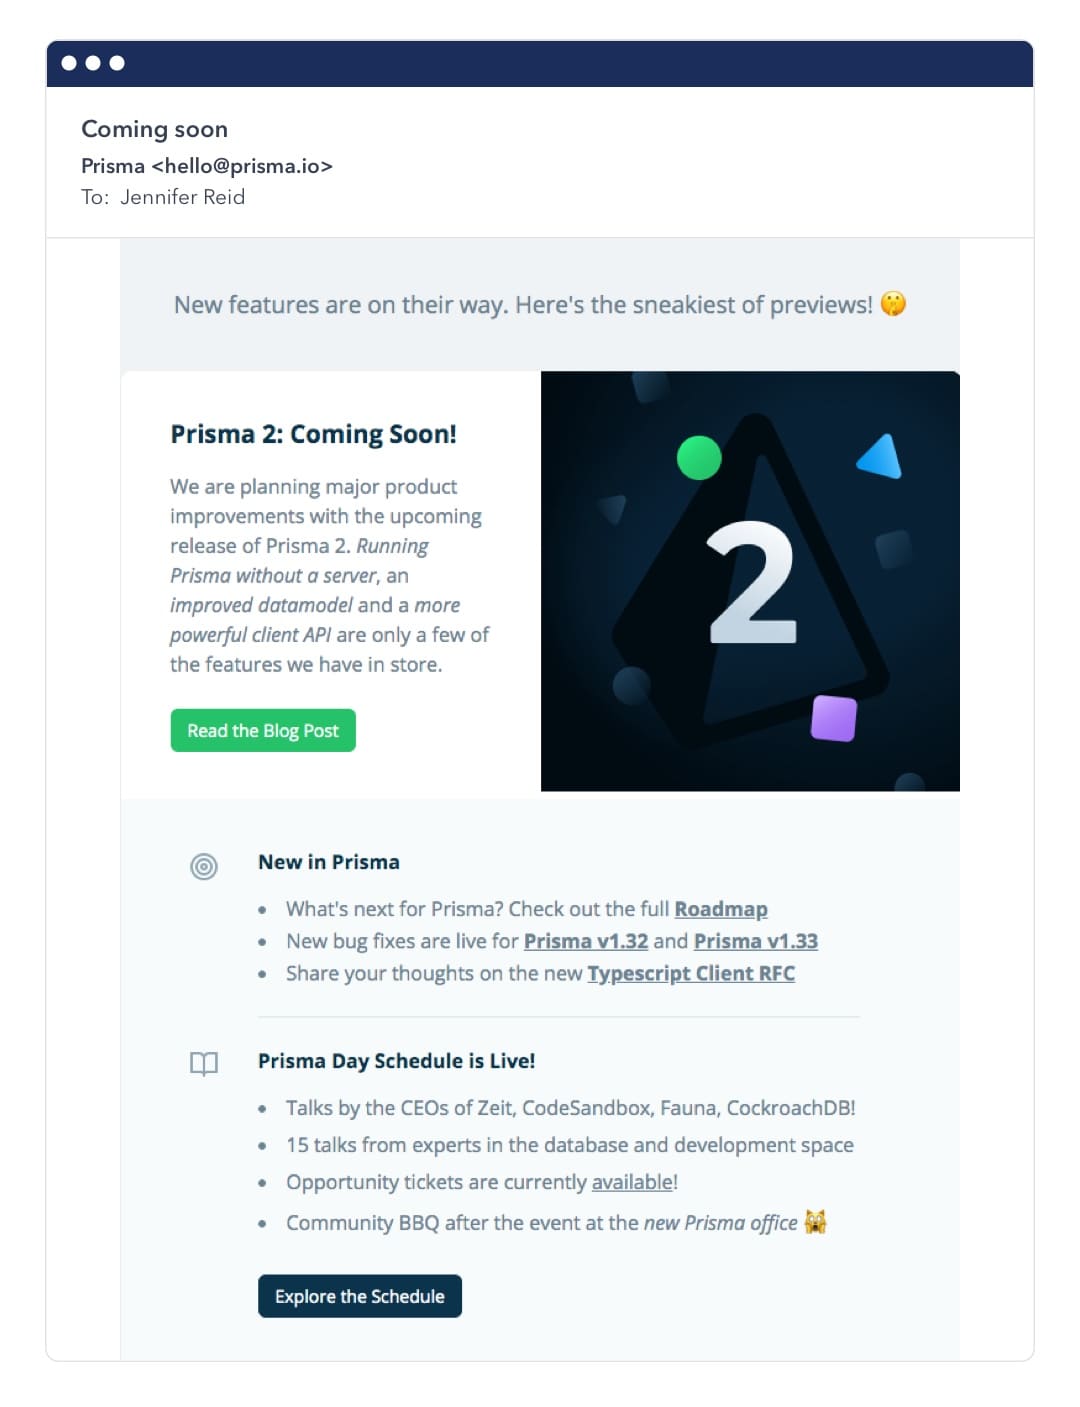 Html Email Templates A Guide For Those Getting Started